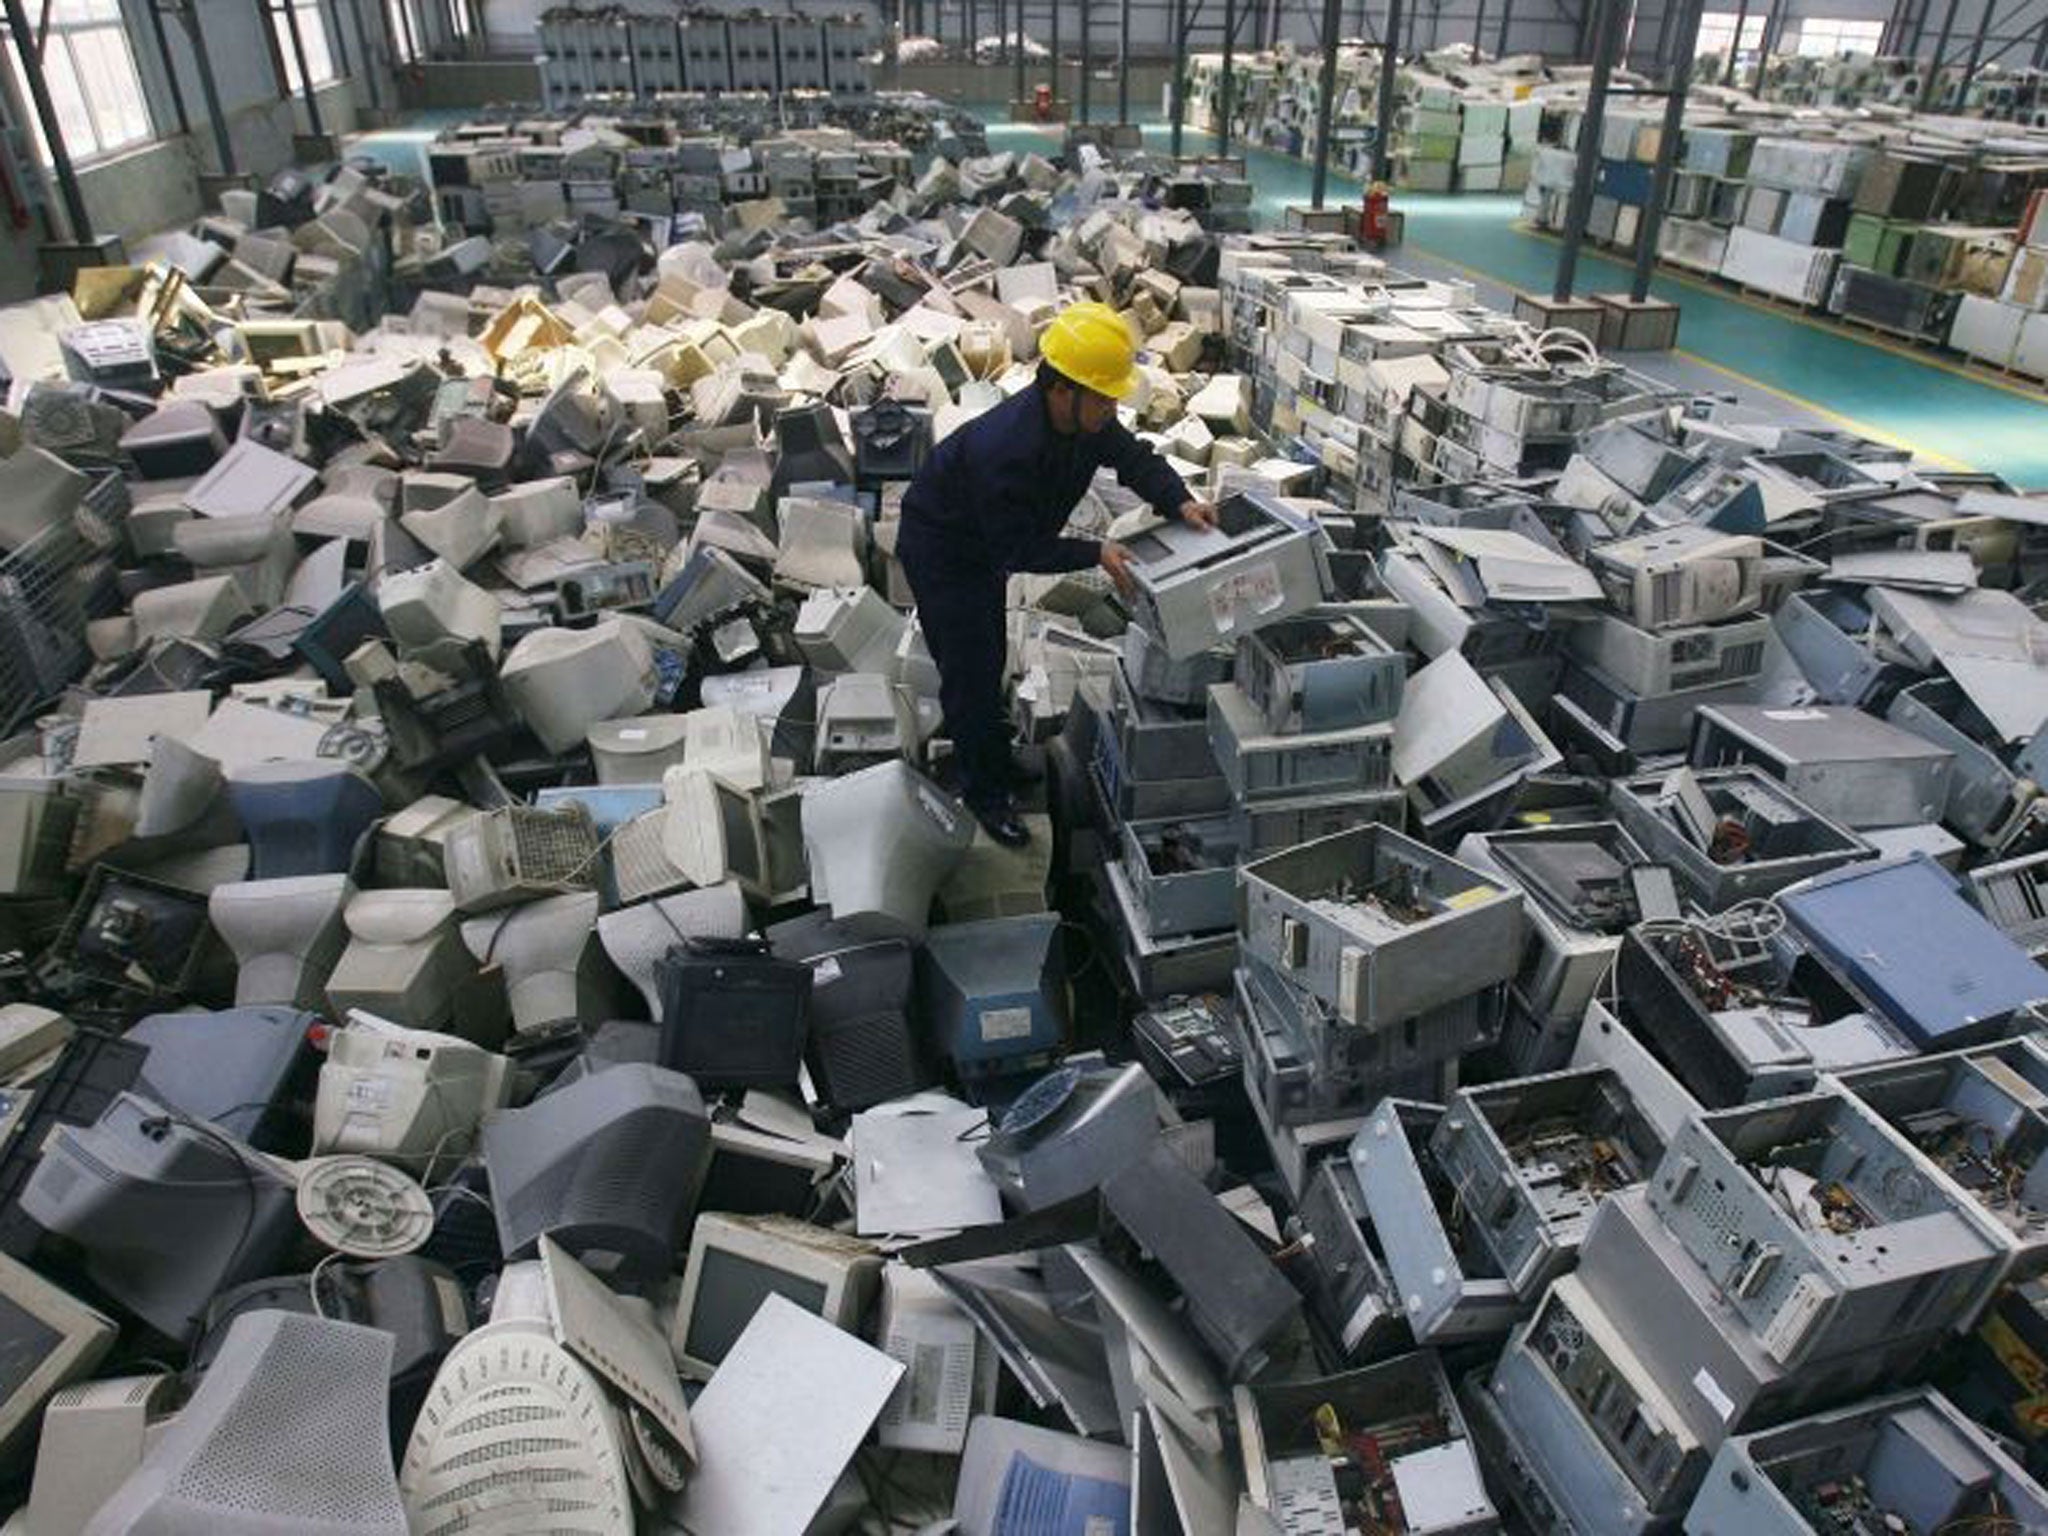 West’s exports: Old computers wait to be recycled in China